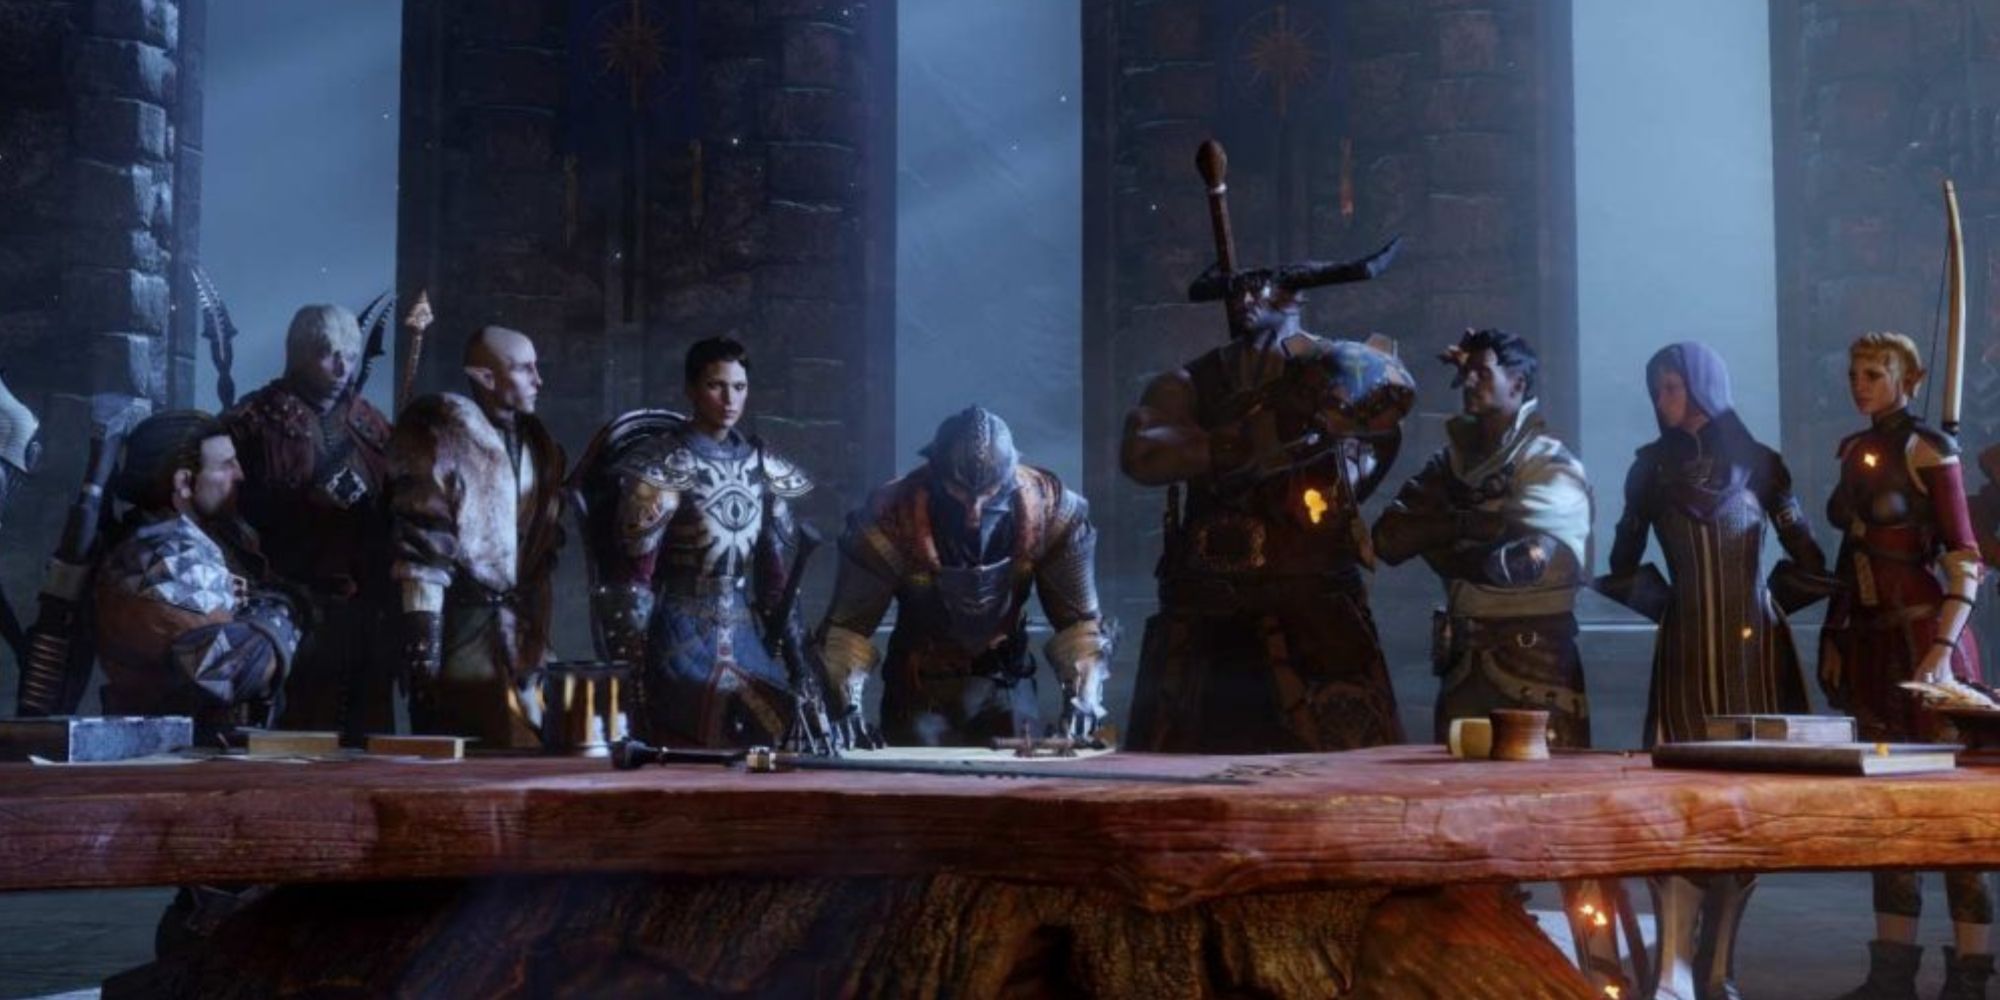 dragon age inquisition multiplayer